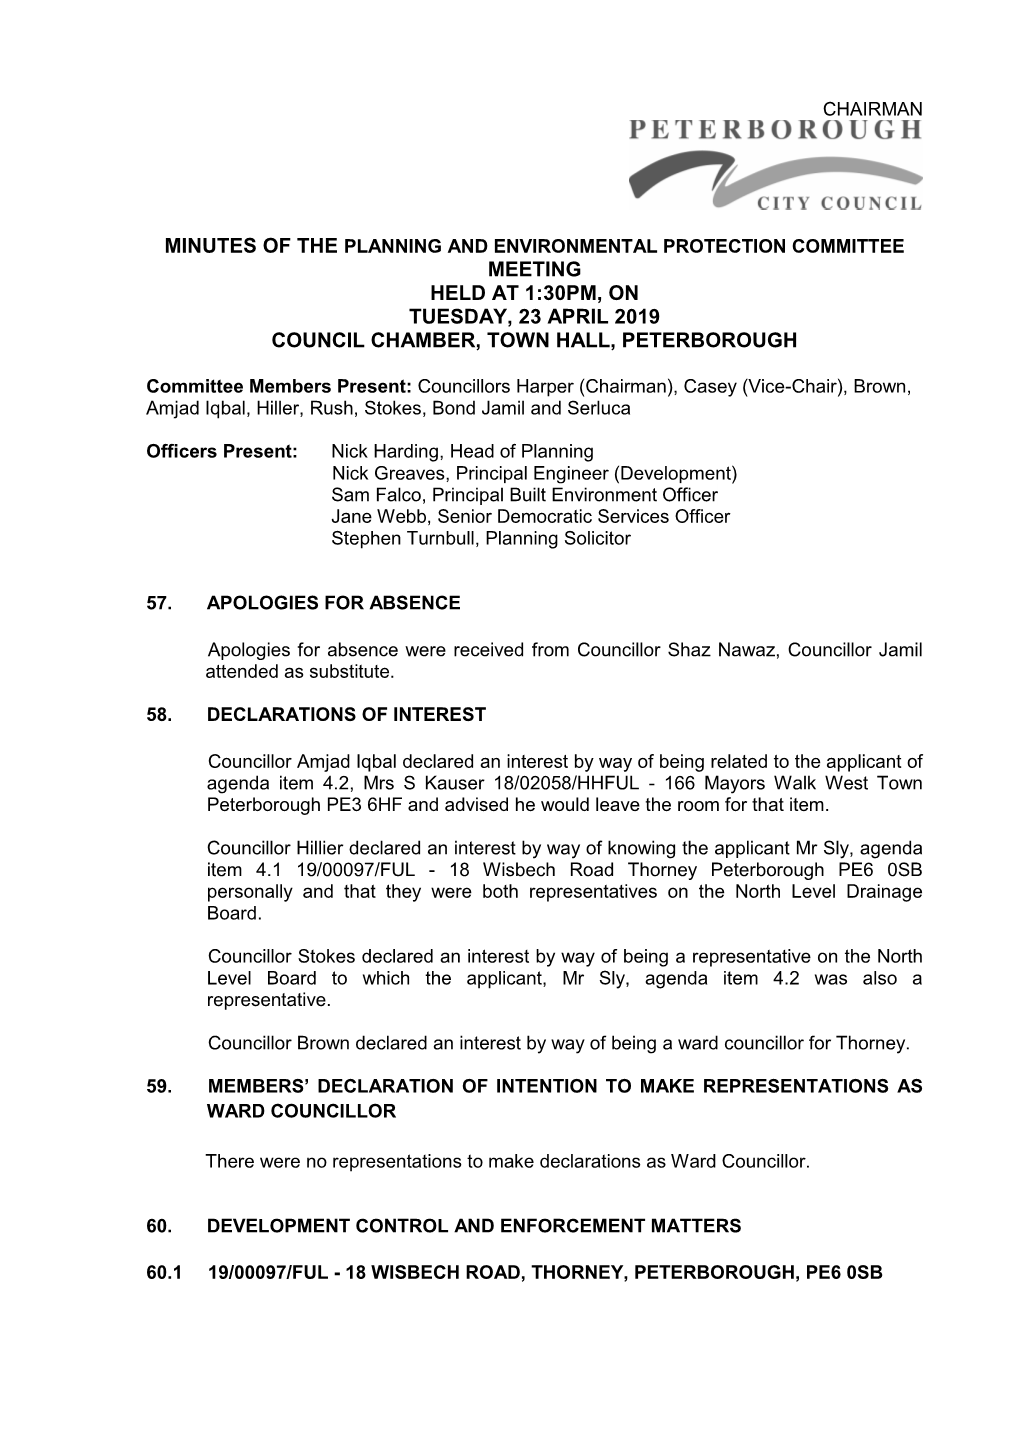 Minutes of the Planning and Environmental Protection Committee Meeting Held at 1:30Pm, on Tuesday, 23 April 2019 Council Chamber, Town Hall, Peterborough